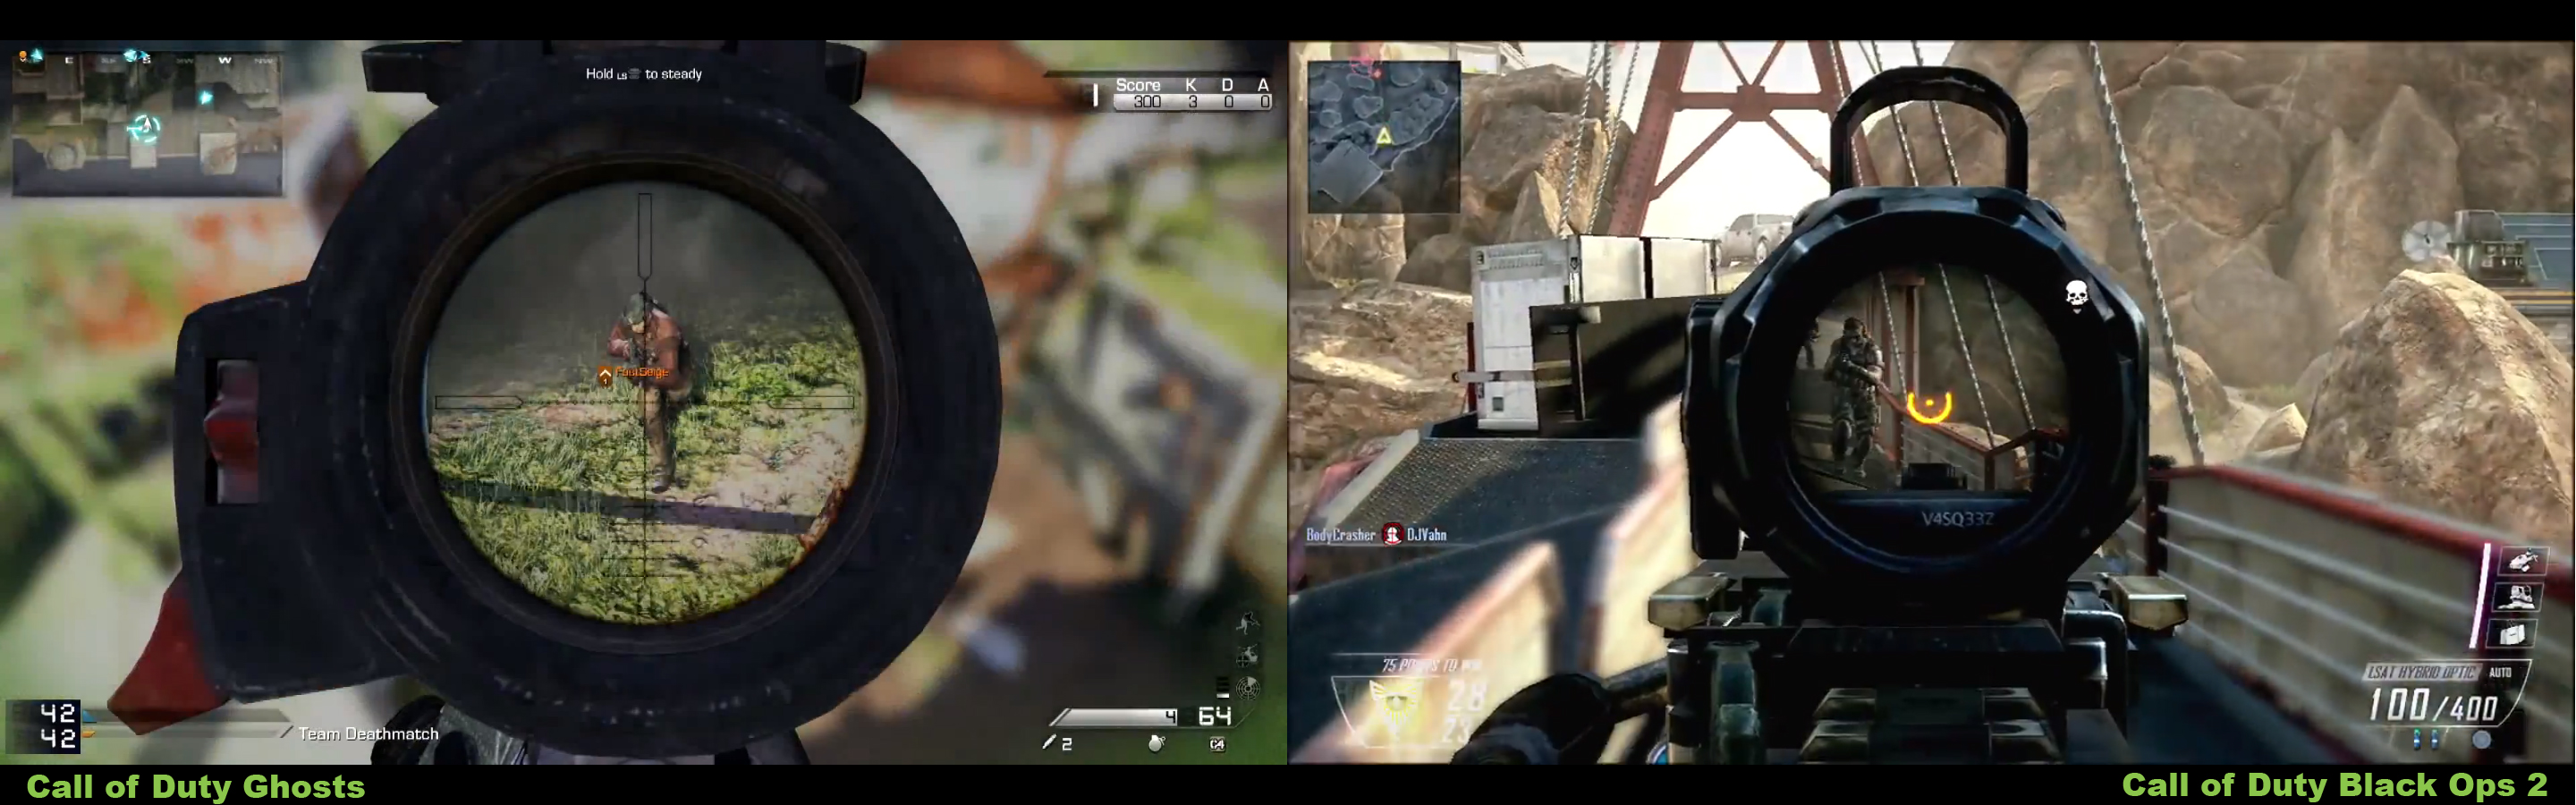 CoD Ghosts PS3 vs CoD Ghosts PS4 